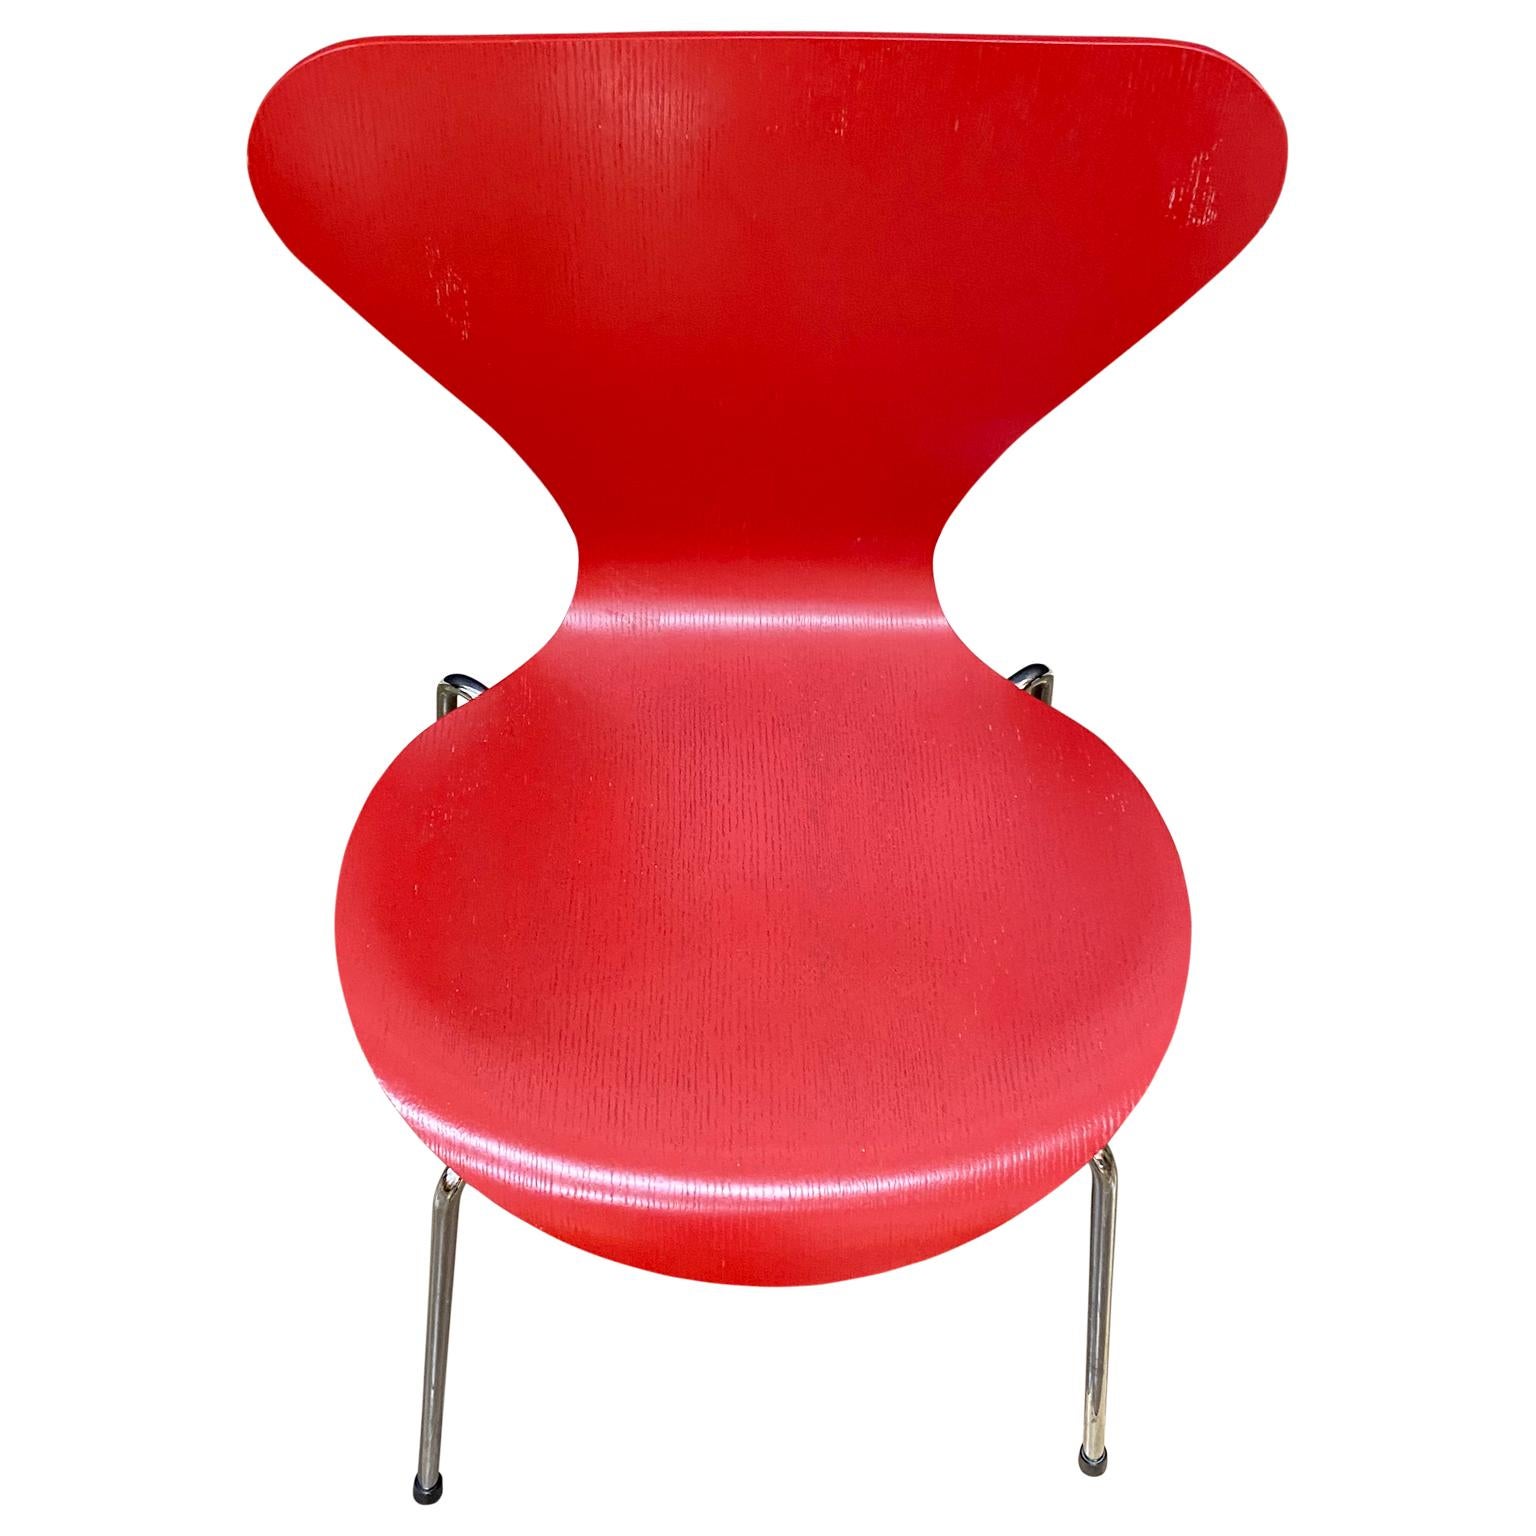 Red Arne Jacobsen dining chair for Fritz Hansen. Mid-Century Modern Series 7, Model 3017 Red Wood Chair. Classic design, perfect for small desk, collect a variety of colors for a fun dining set or just as an occasional chair. The chair is marked